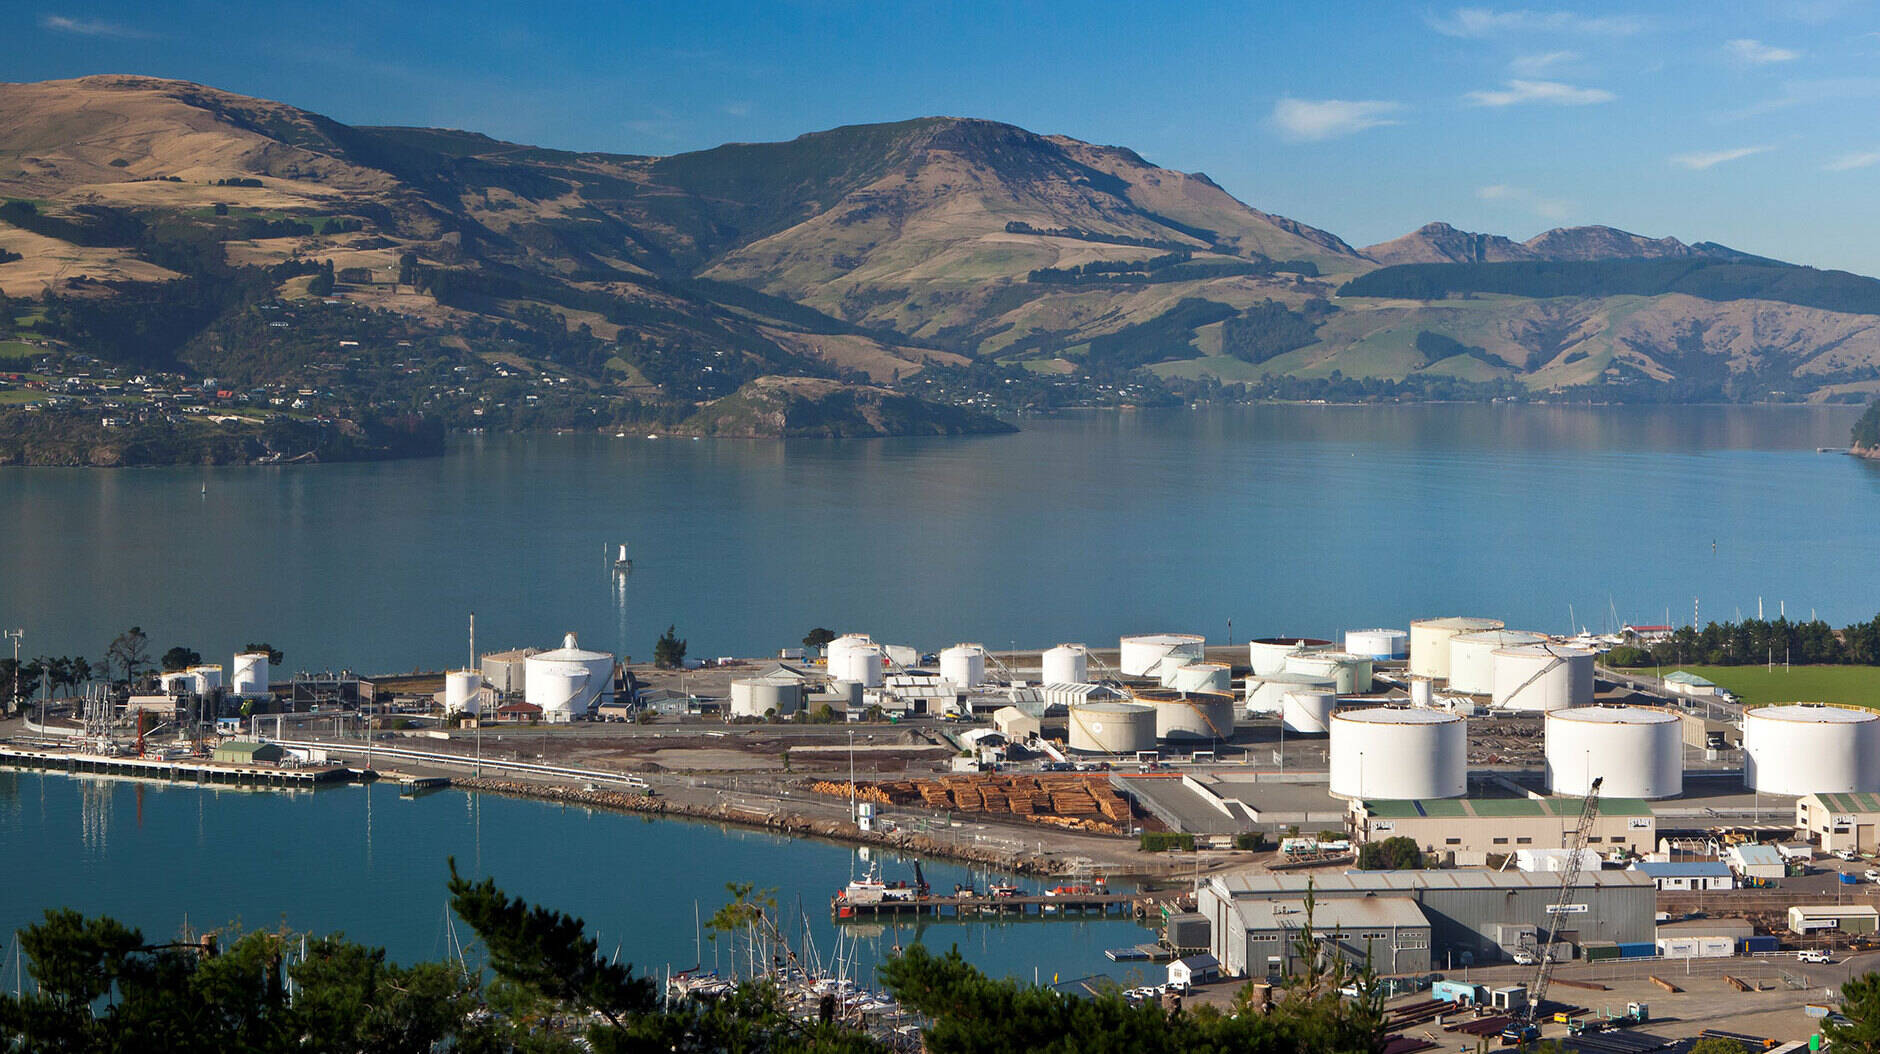 Image Photo — Restoring the Lyttelton fuel terminal’s storage capacity is the latest of several recent major investments by Mobil to enhance its fuel product offerings to New Zealand customers.